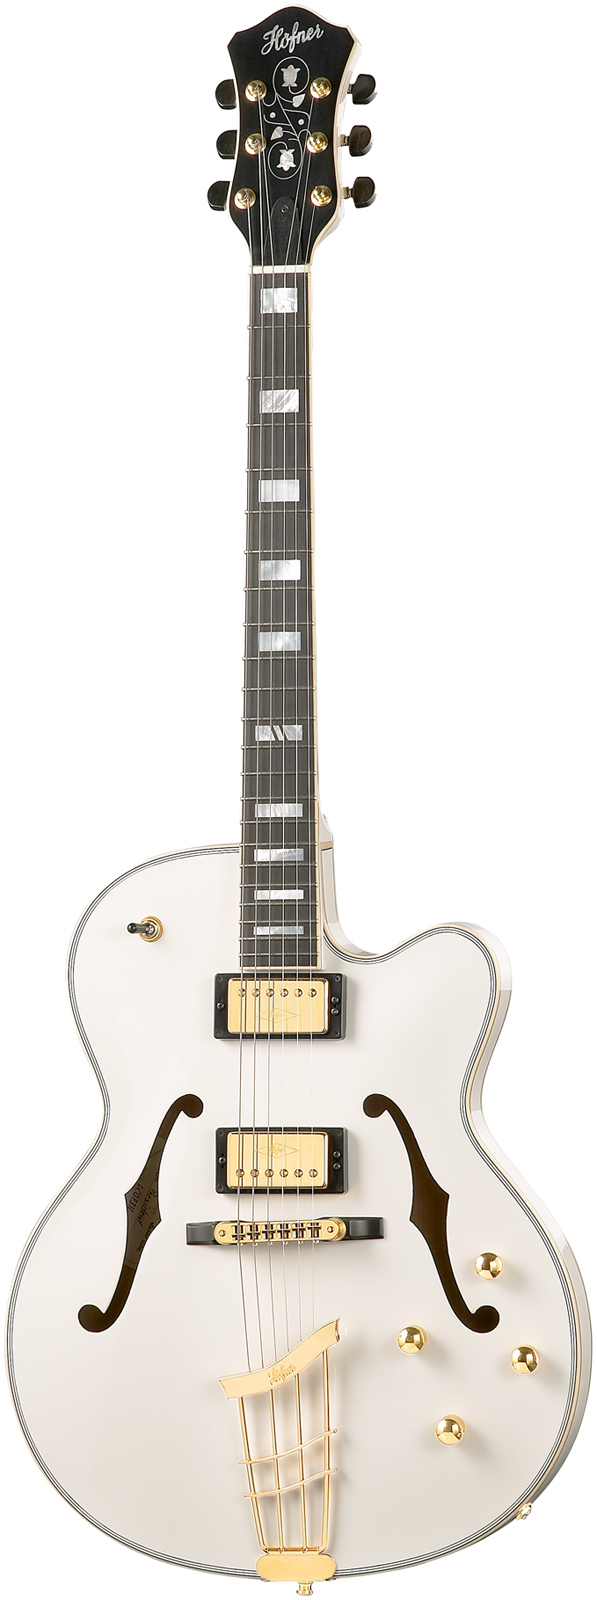 Gibson ES-135 - Sound difference between stoptail and trapeze tailpiece hollowbody?-hofner-htp-e2-w-0-jpg